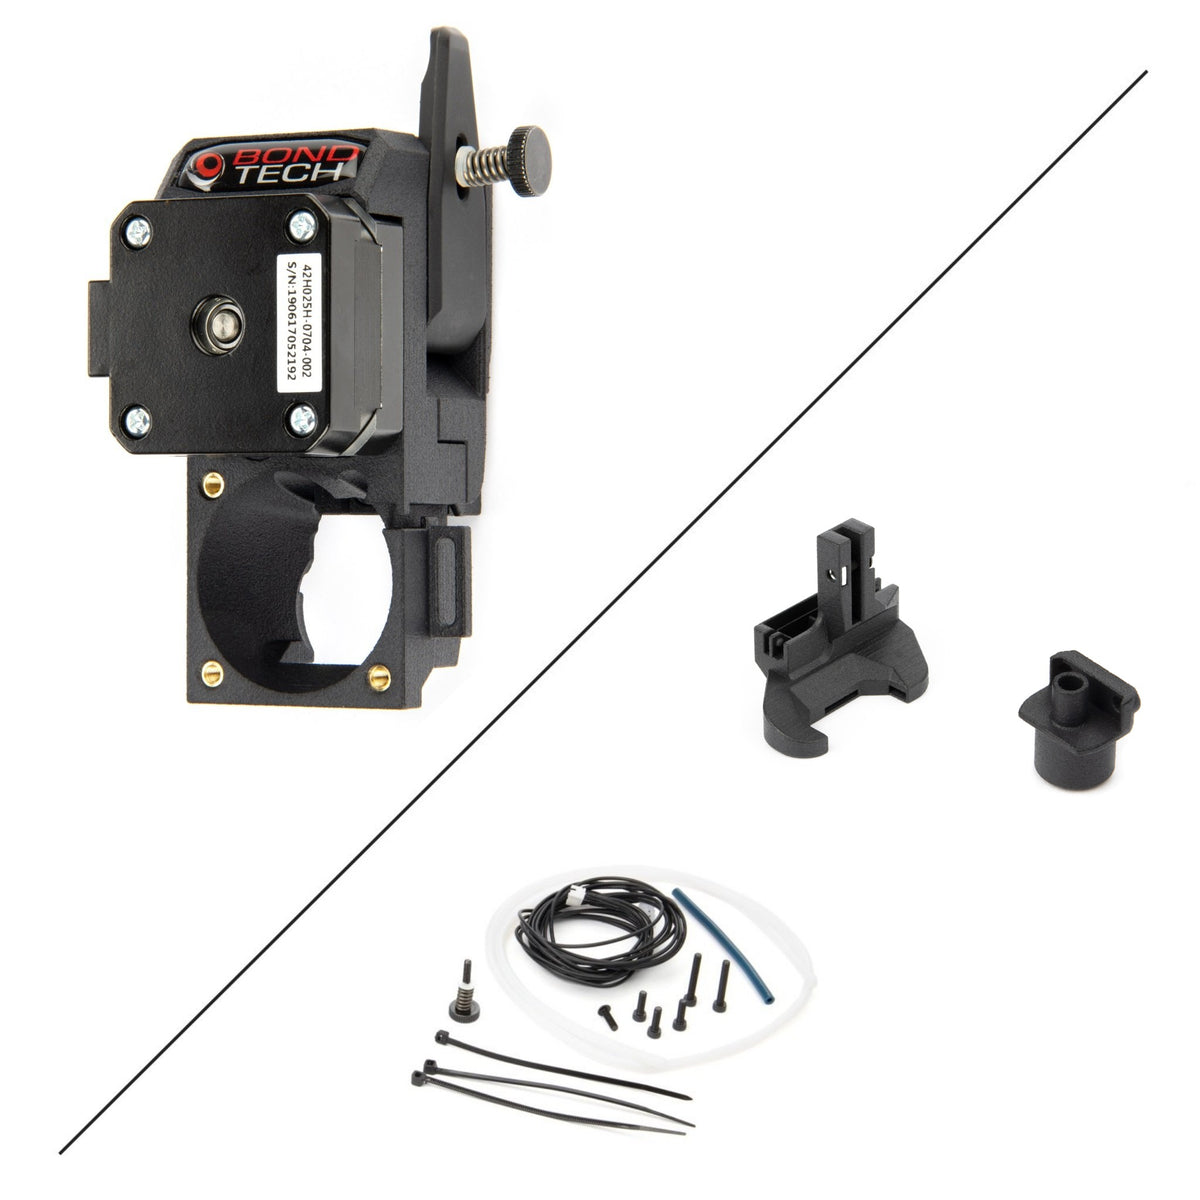 Direct Drive Vs Bowden Extruder-Beginner Guide On Extruder Style